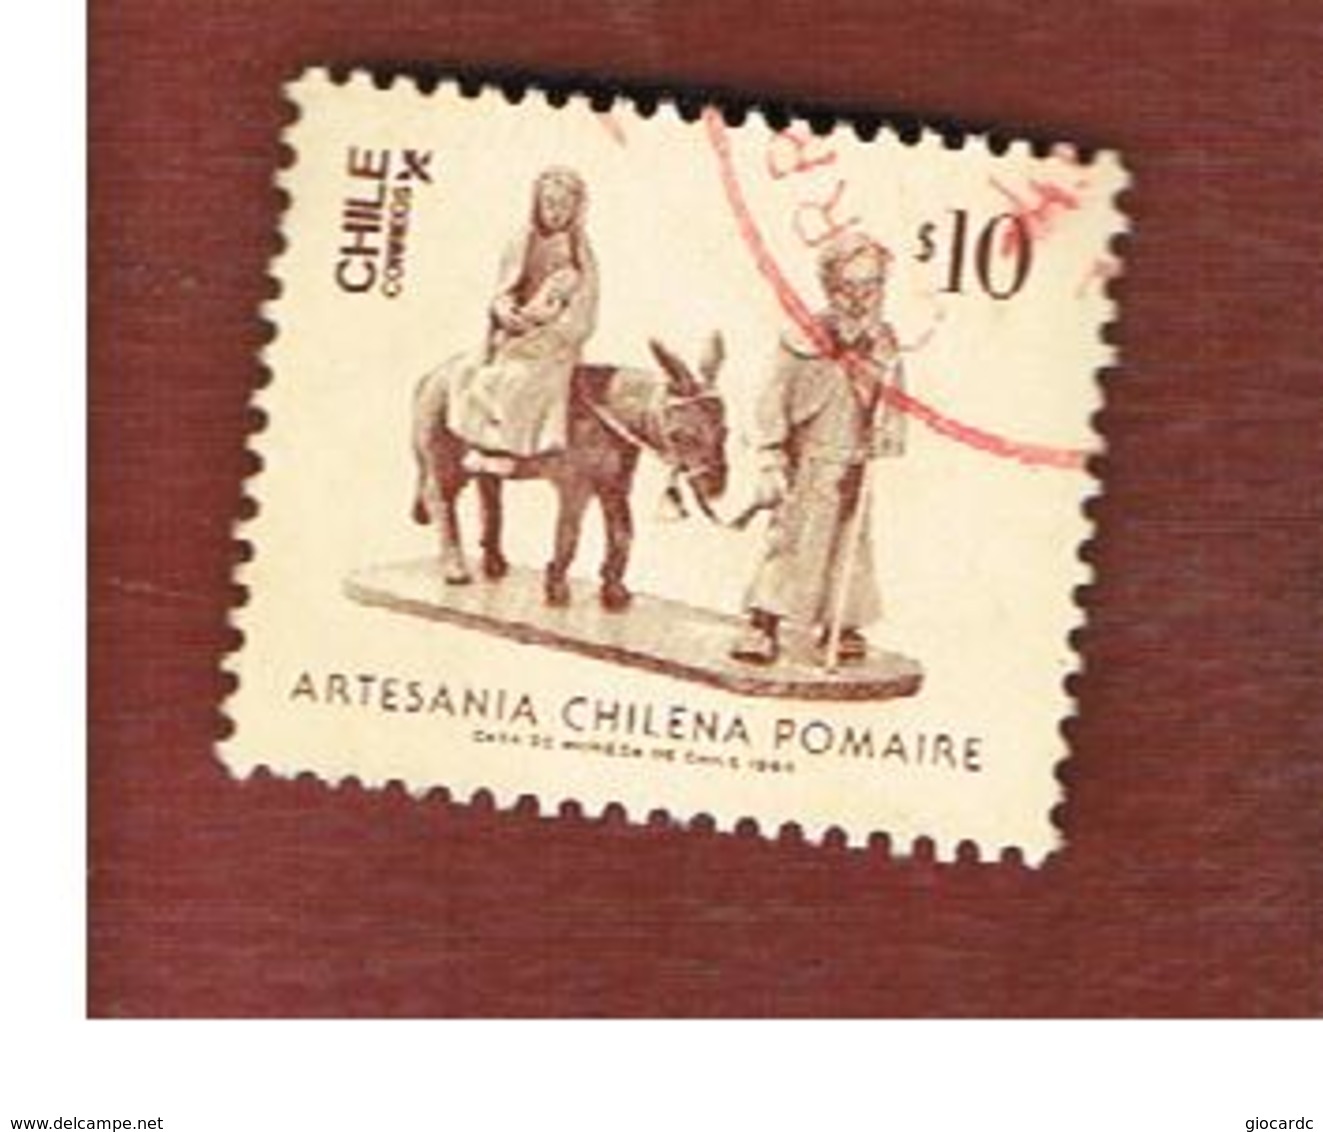 CILE (CHILE)  - SG 1029  -    1985 CHILEAN ART: HOLY FAMILY  -     USED ° - Cile